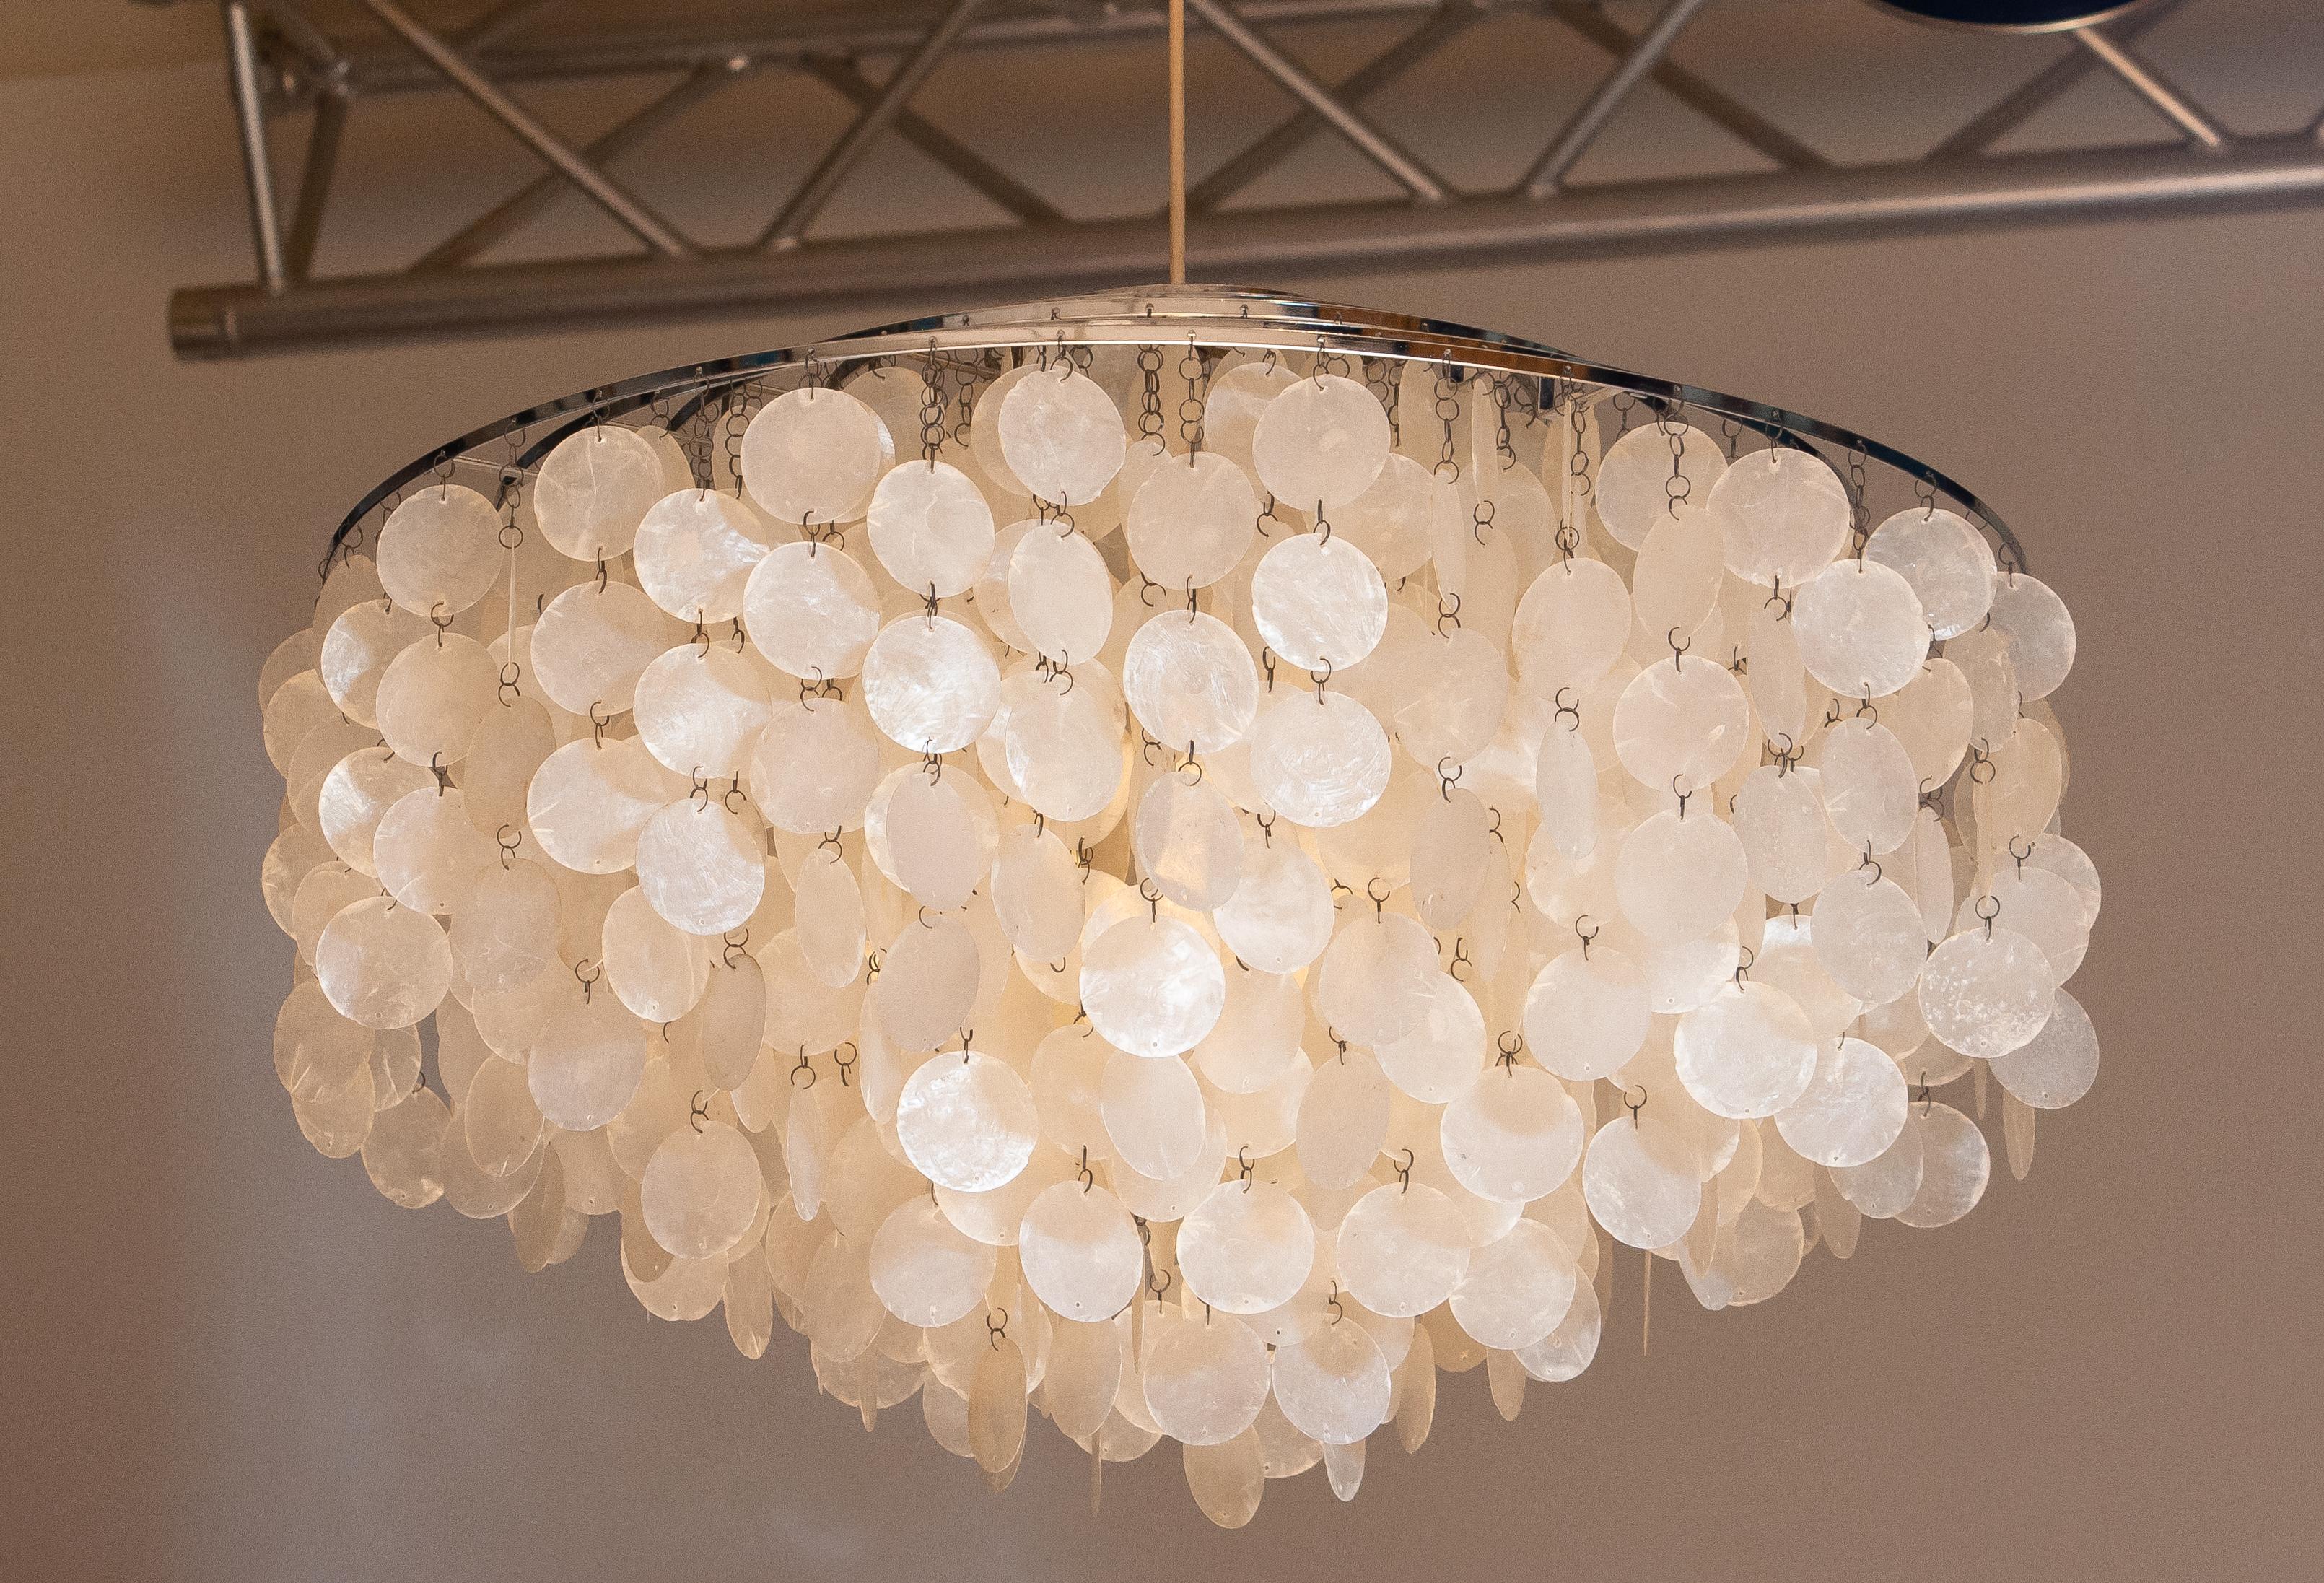 Pair of Extra Large Capiz Shell Chandeliers by Verner Panton for Luber AG. Swiss 6